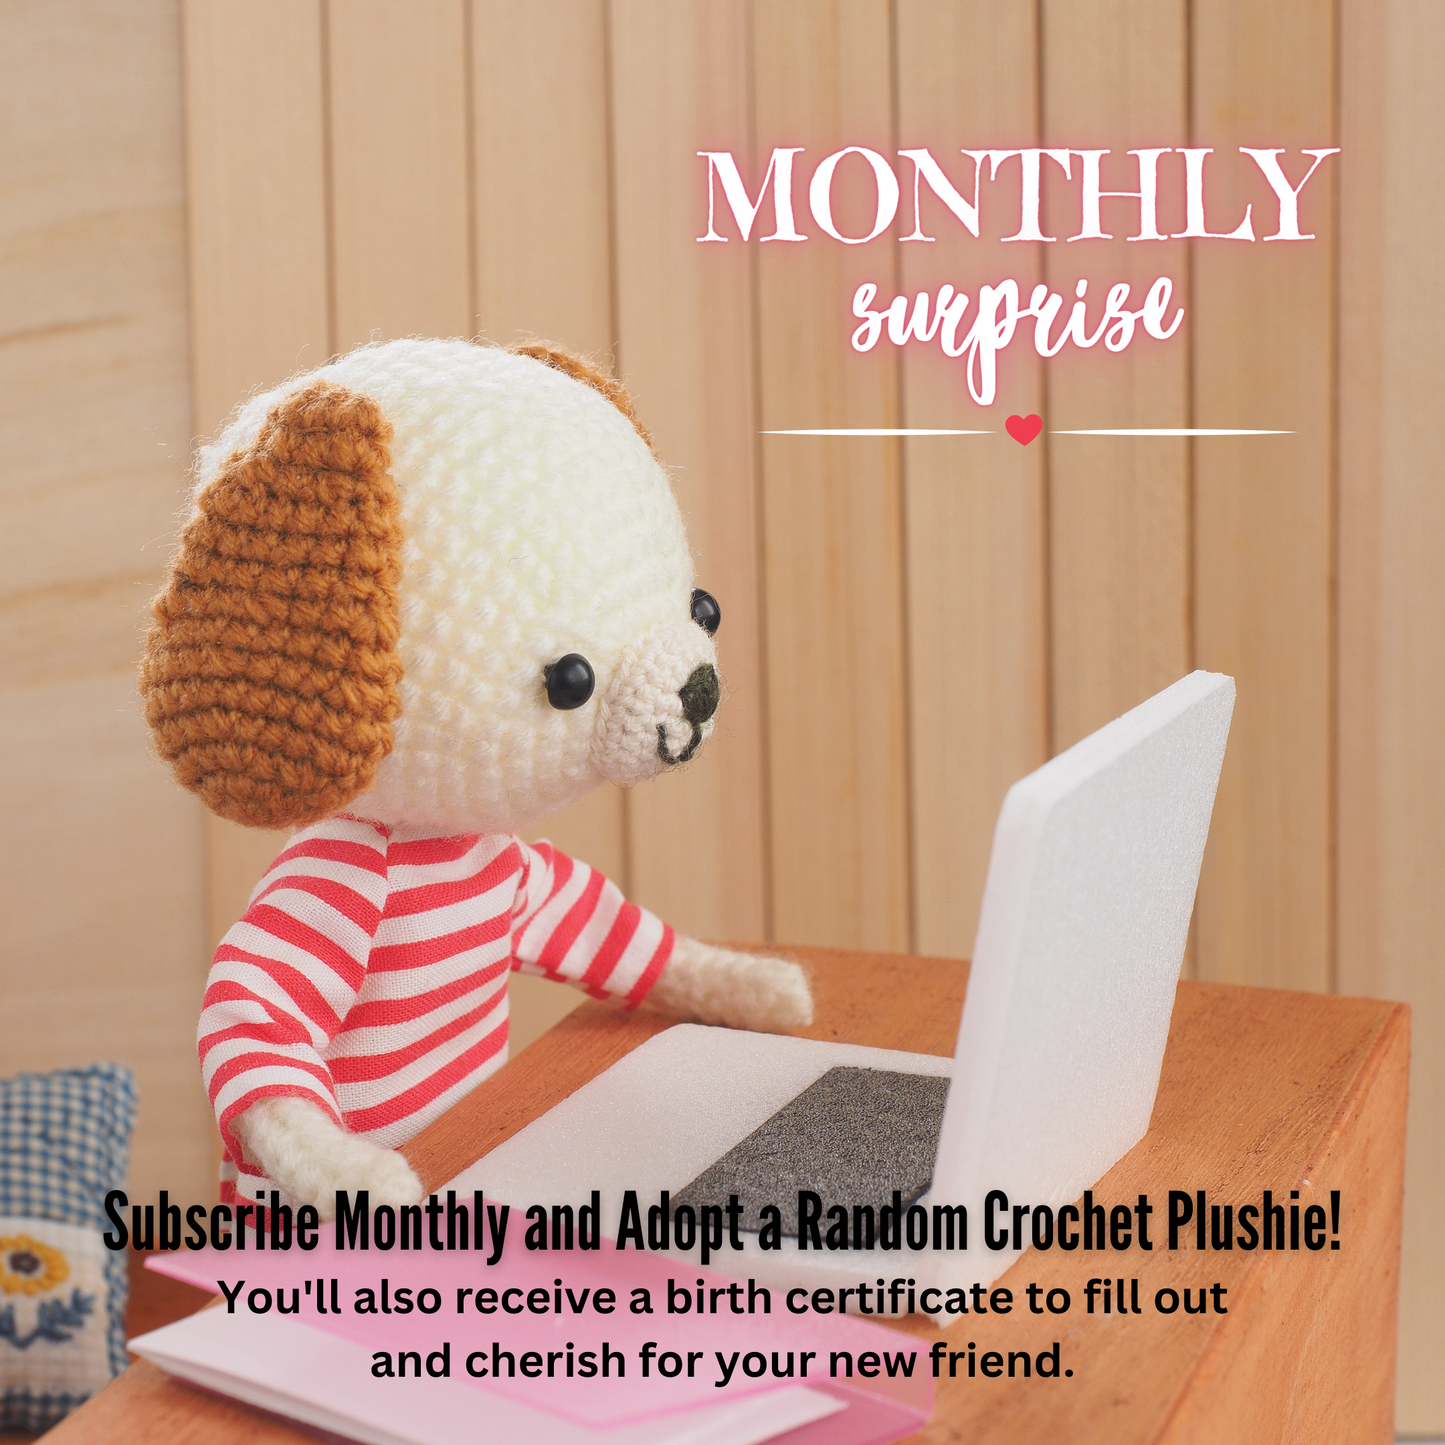 Monthly Surprise Crochet Plushie